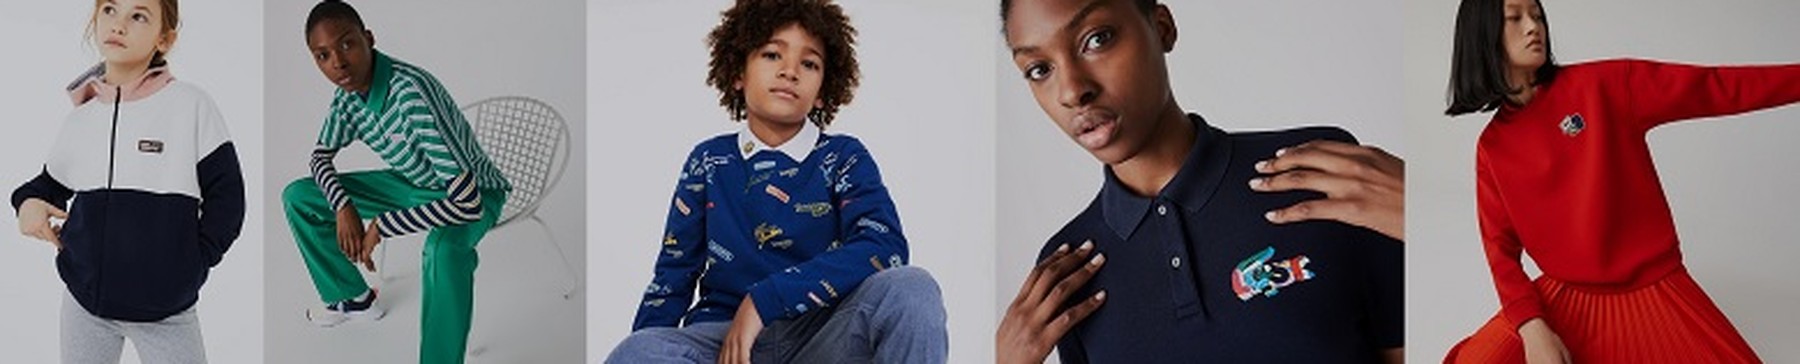 Lacoste Semi-Annual Sale: Up to 50% Off